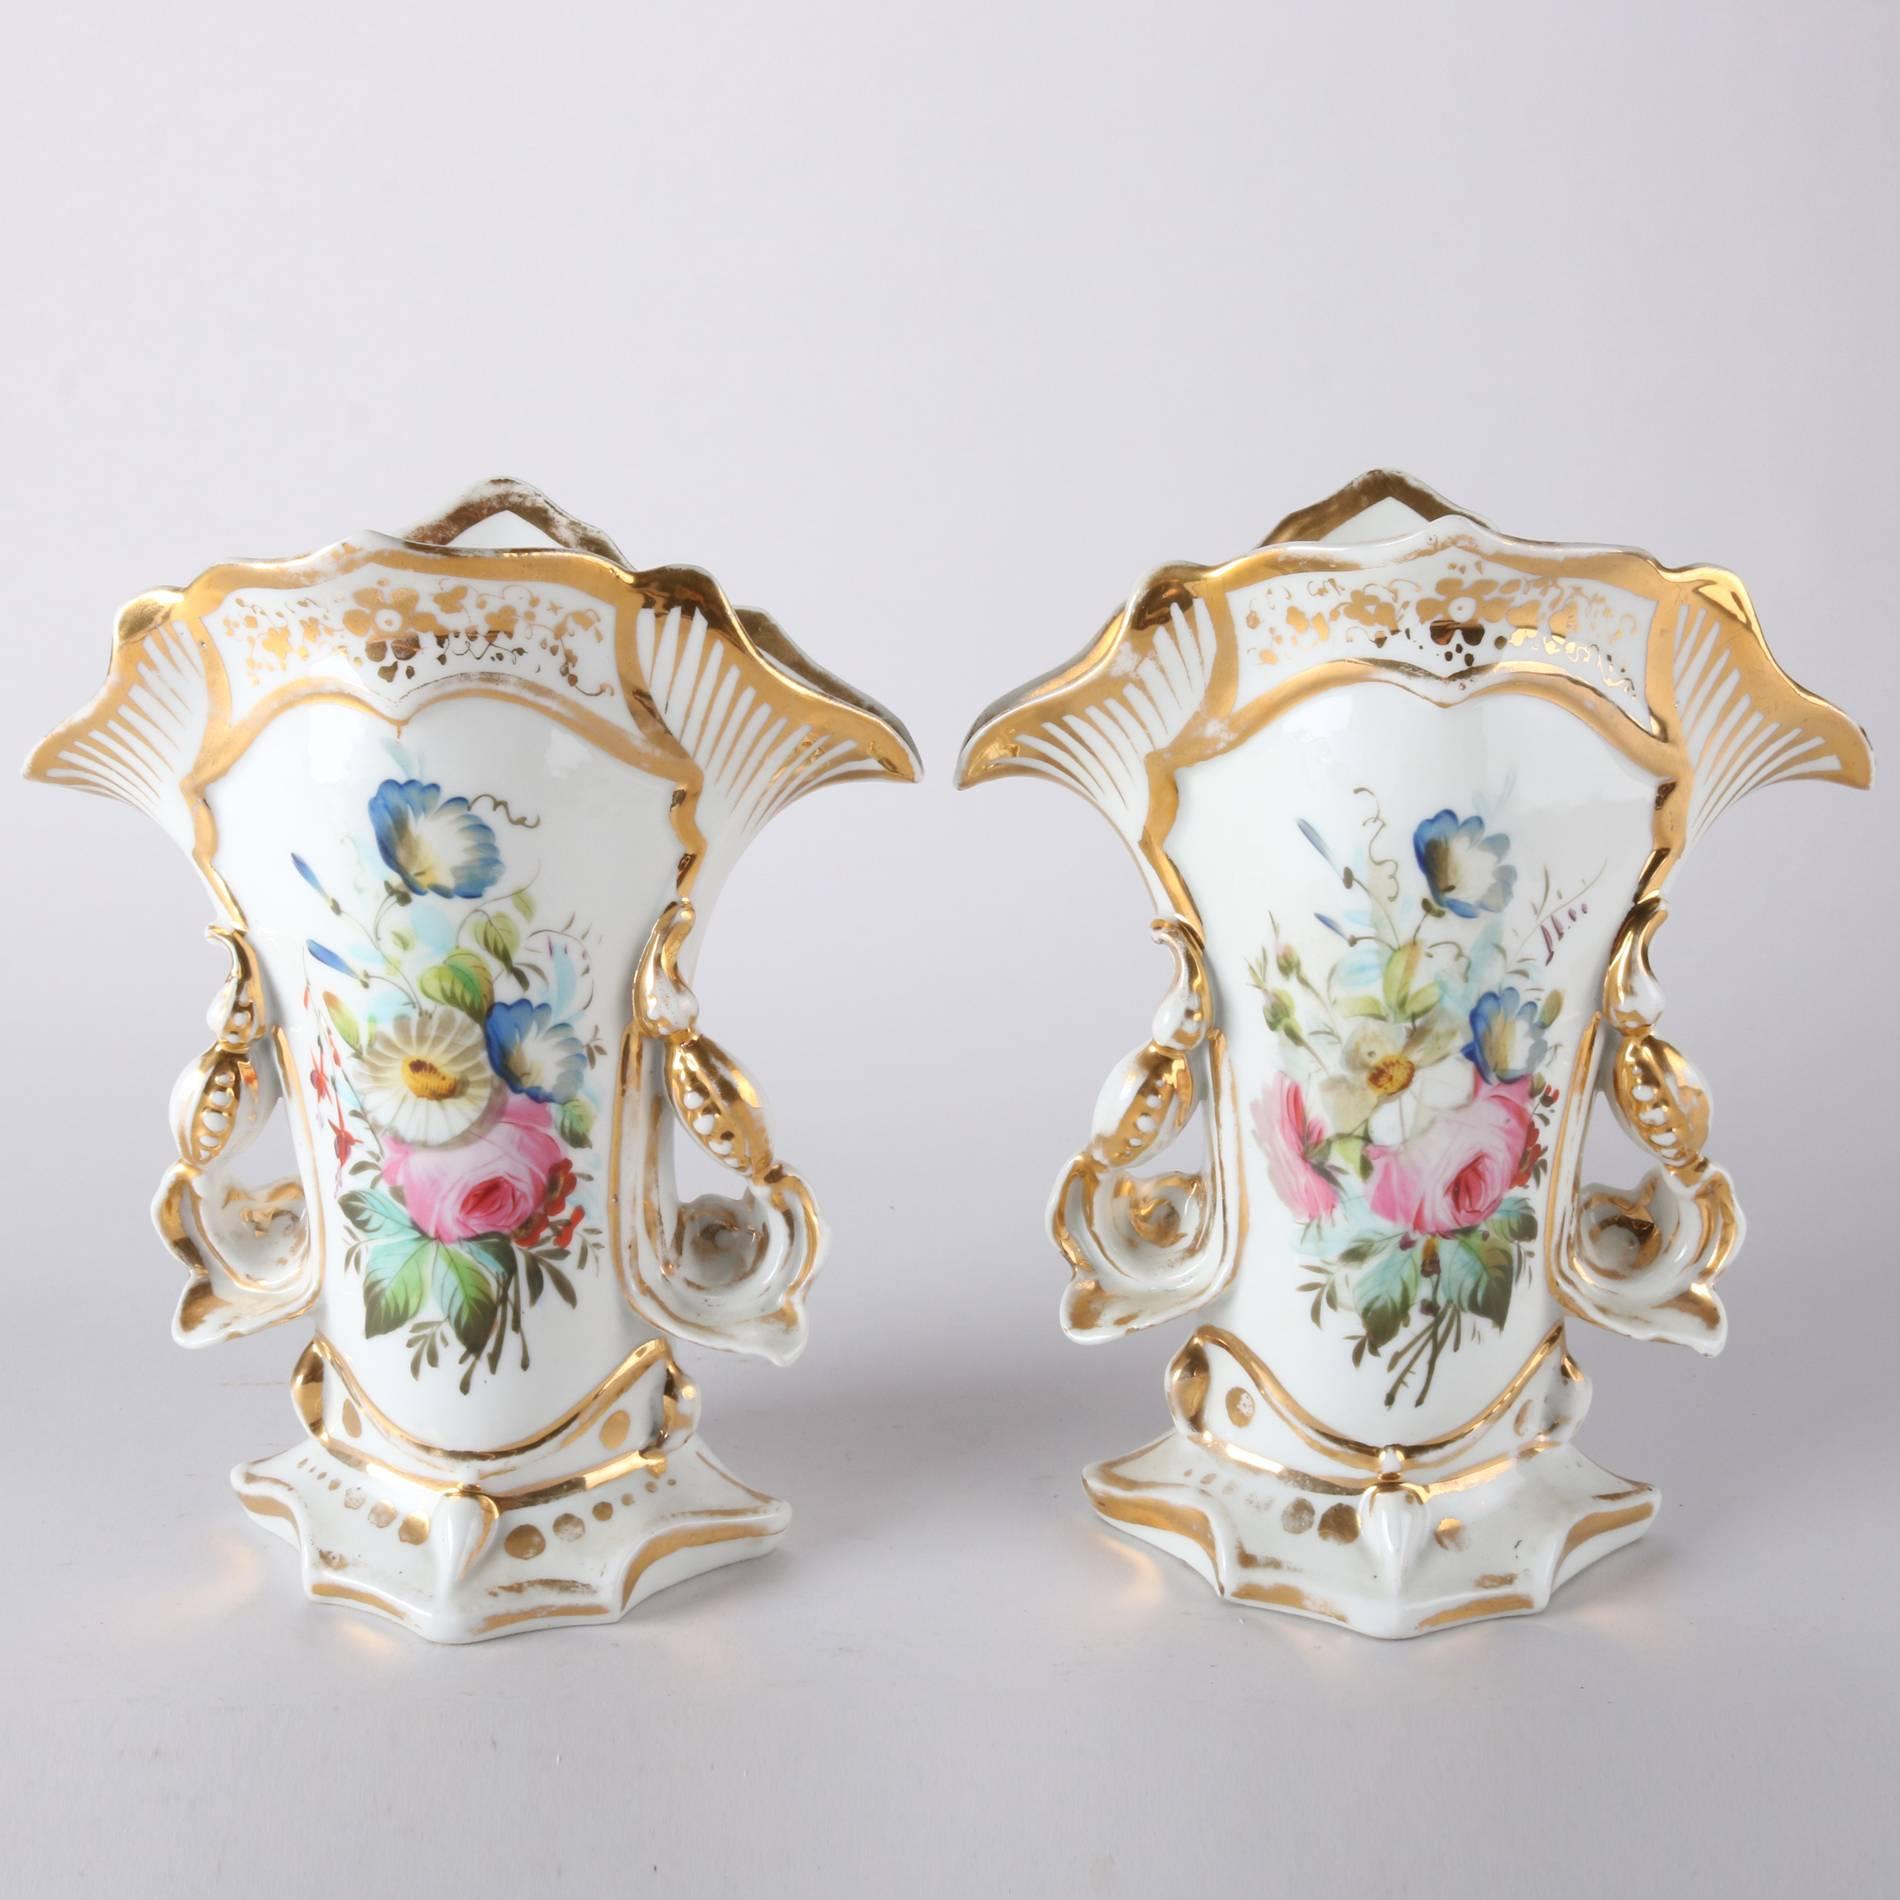 Pair of Antique French Old Paris Hand-Painted & Gilt Handled Spill Vases 2